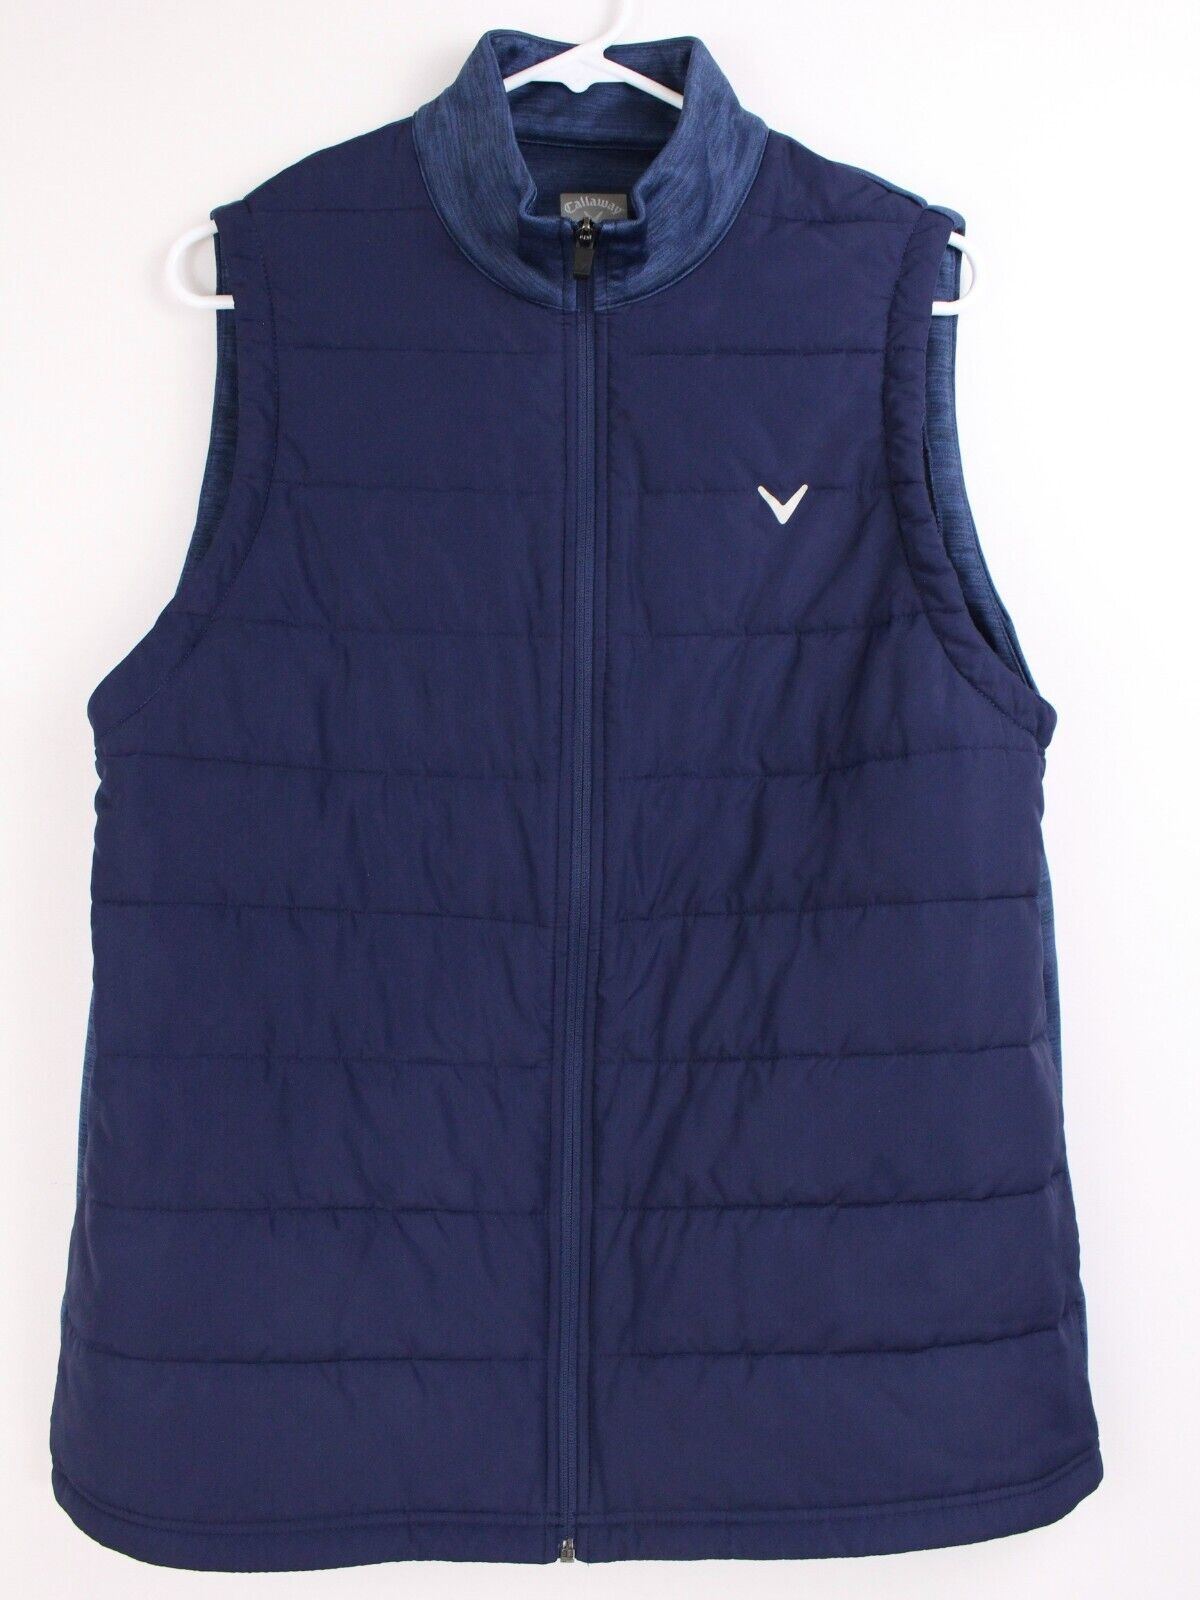 Callaway Quilted Golf Vest Men's Size Large Full Zip Sleeveless Navy Blue - £17.40 GBP